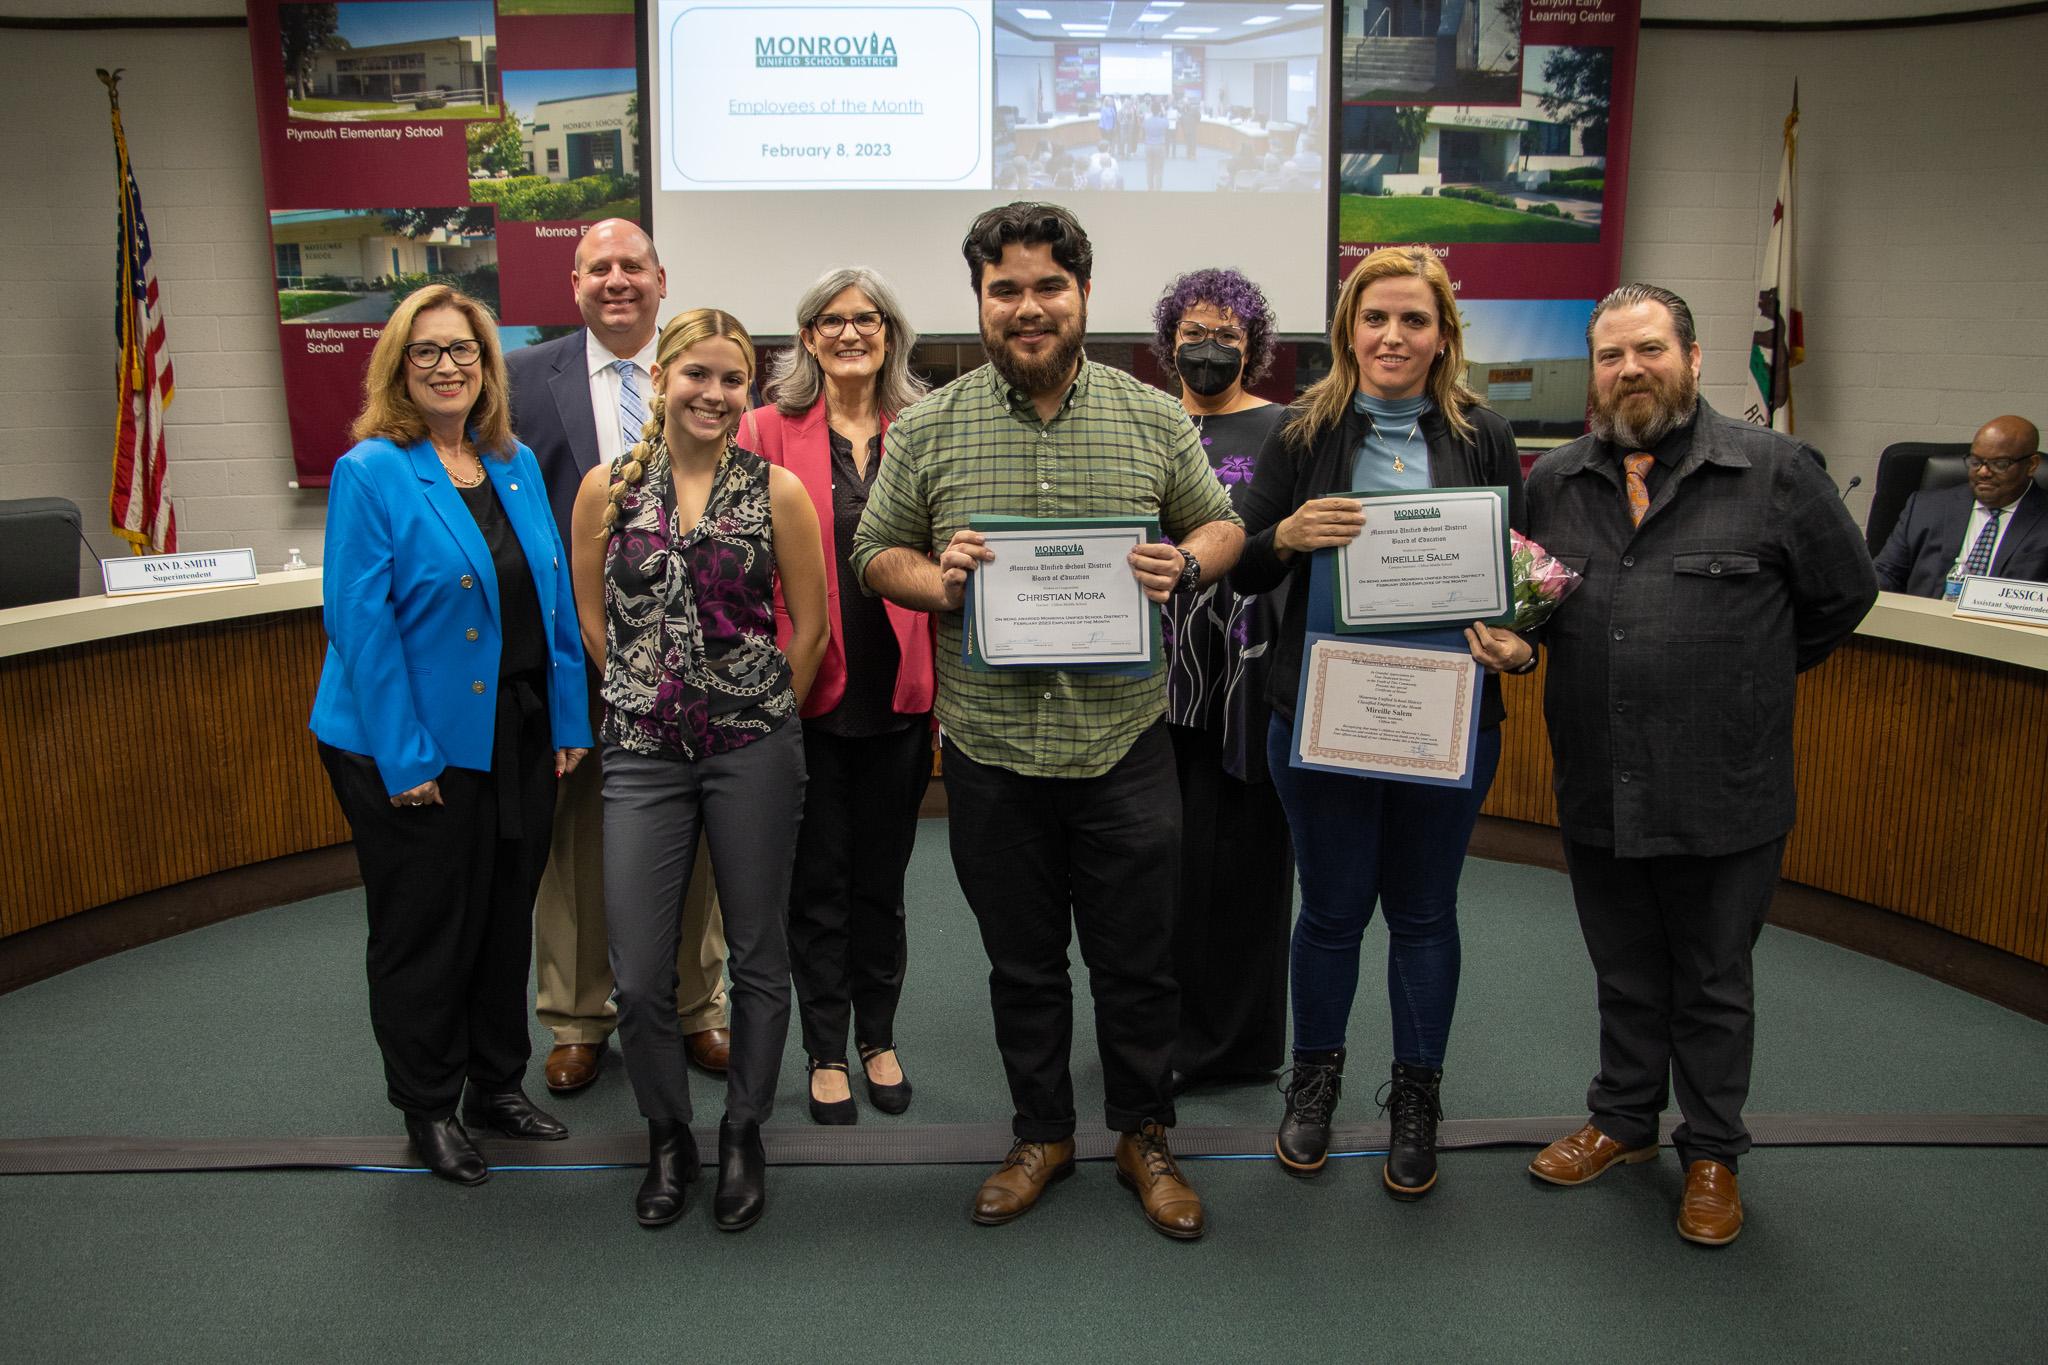 The Board of Education & the Monrovia Chamber of Commerce congratulated the recipients of Monrovia Unified School District's "Employees of the Month" for February.